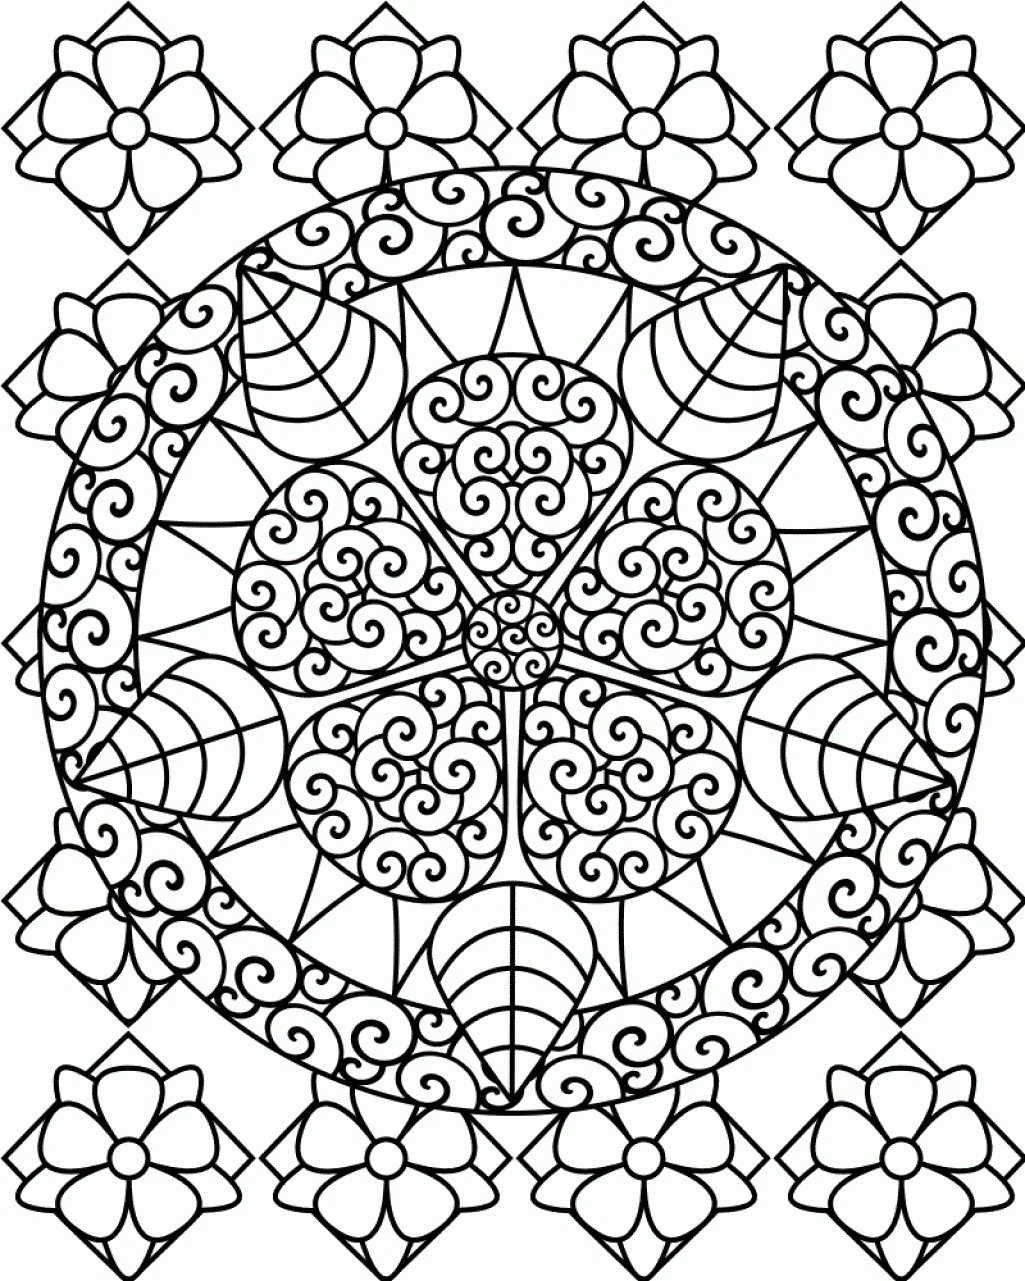 Download And Print Flower Butterfly Mandala| Coloring Pages Kids